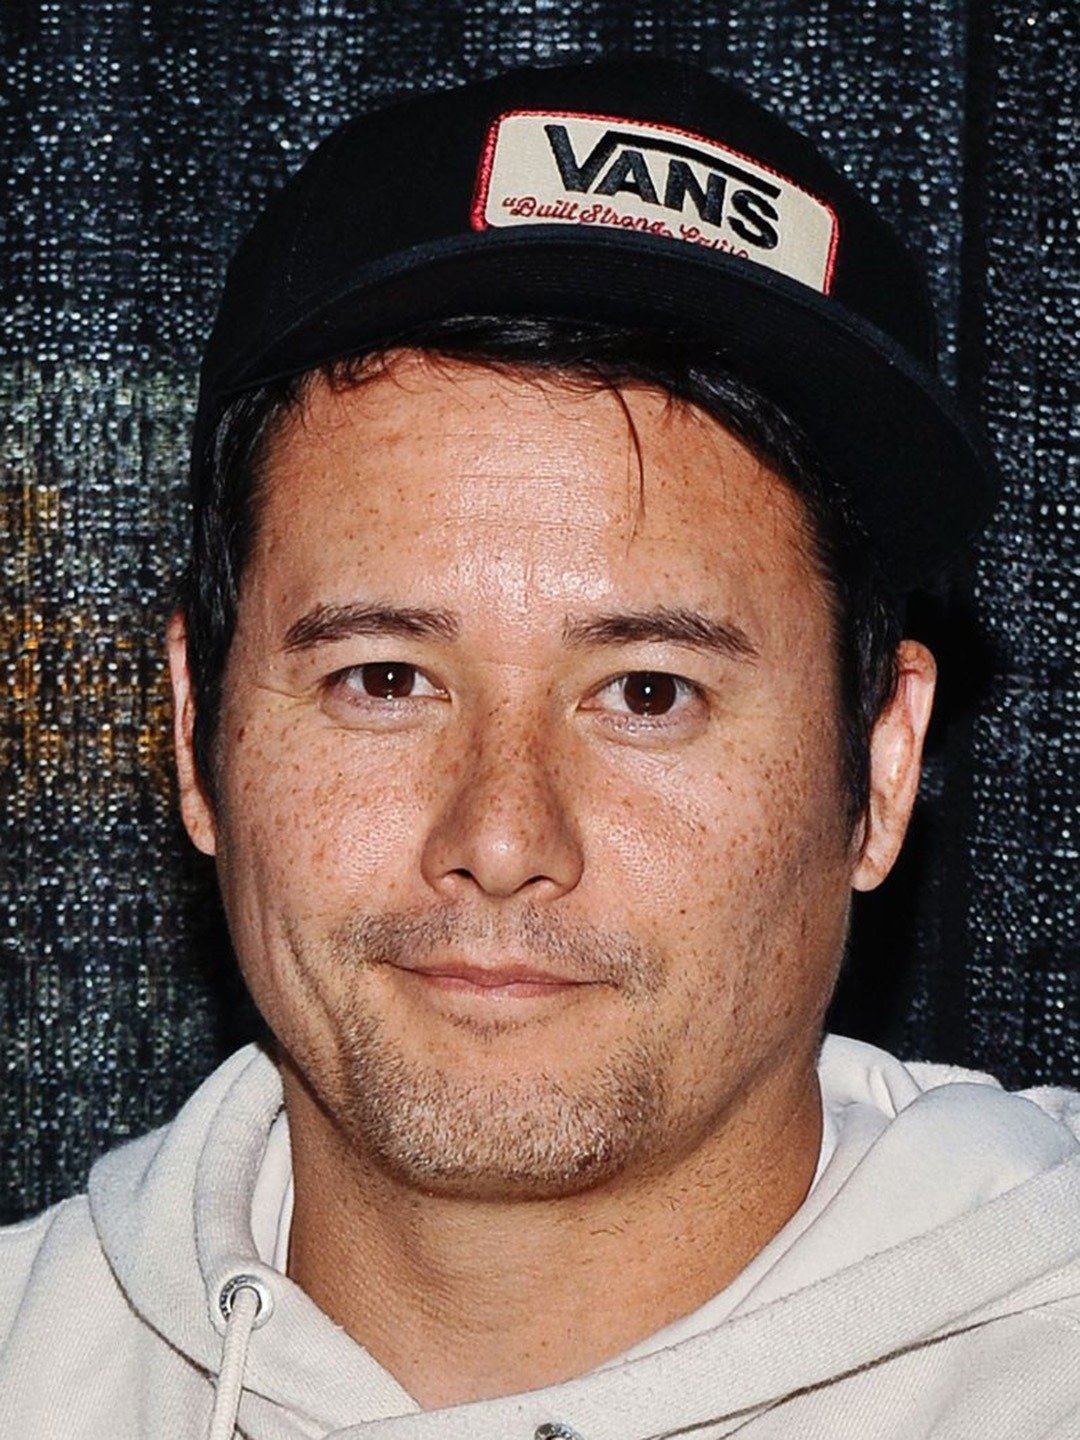 How tall is Johnny Yong Bosch?